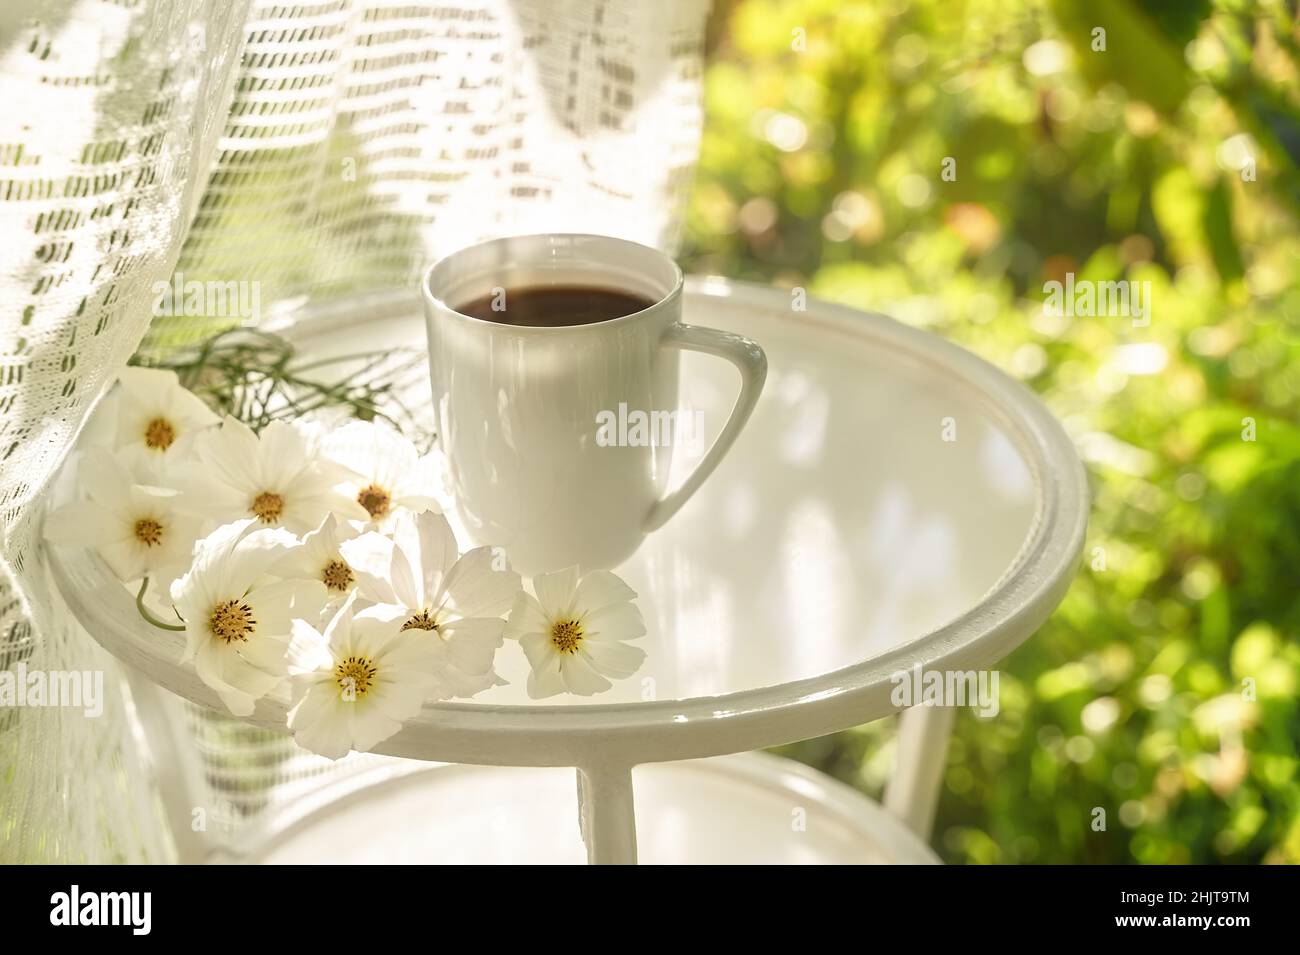 https://c8.alamy.com/comp/2HJT9TM/beautiful-porcelain-coffee-cup-with-white-flowers-on-glass-table-in-summer-garden-in-sunlight-top-view-copy-space-summer-drinks-concept-2HJT9TM.jpg